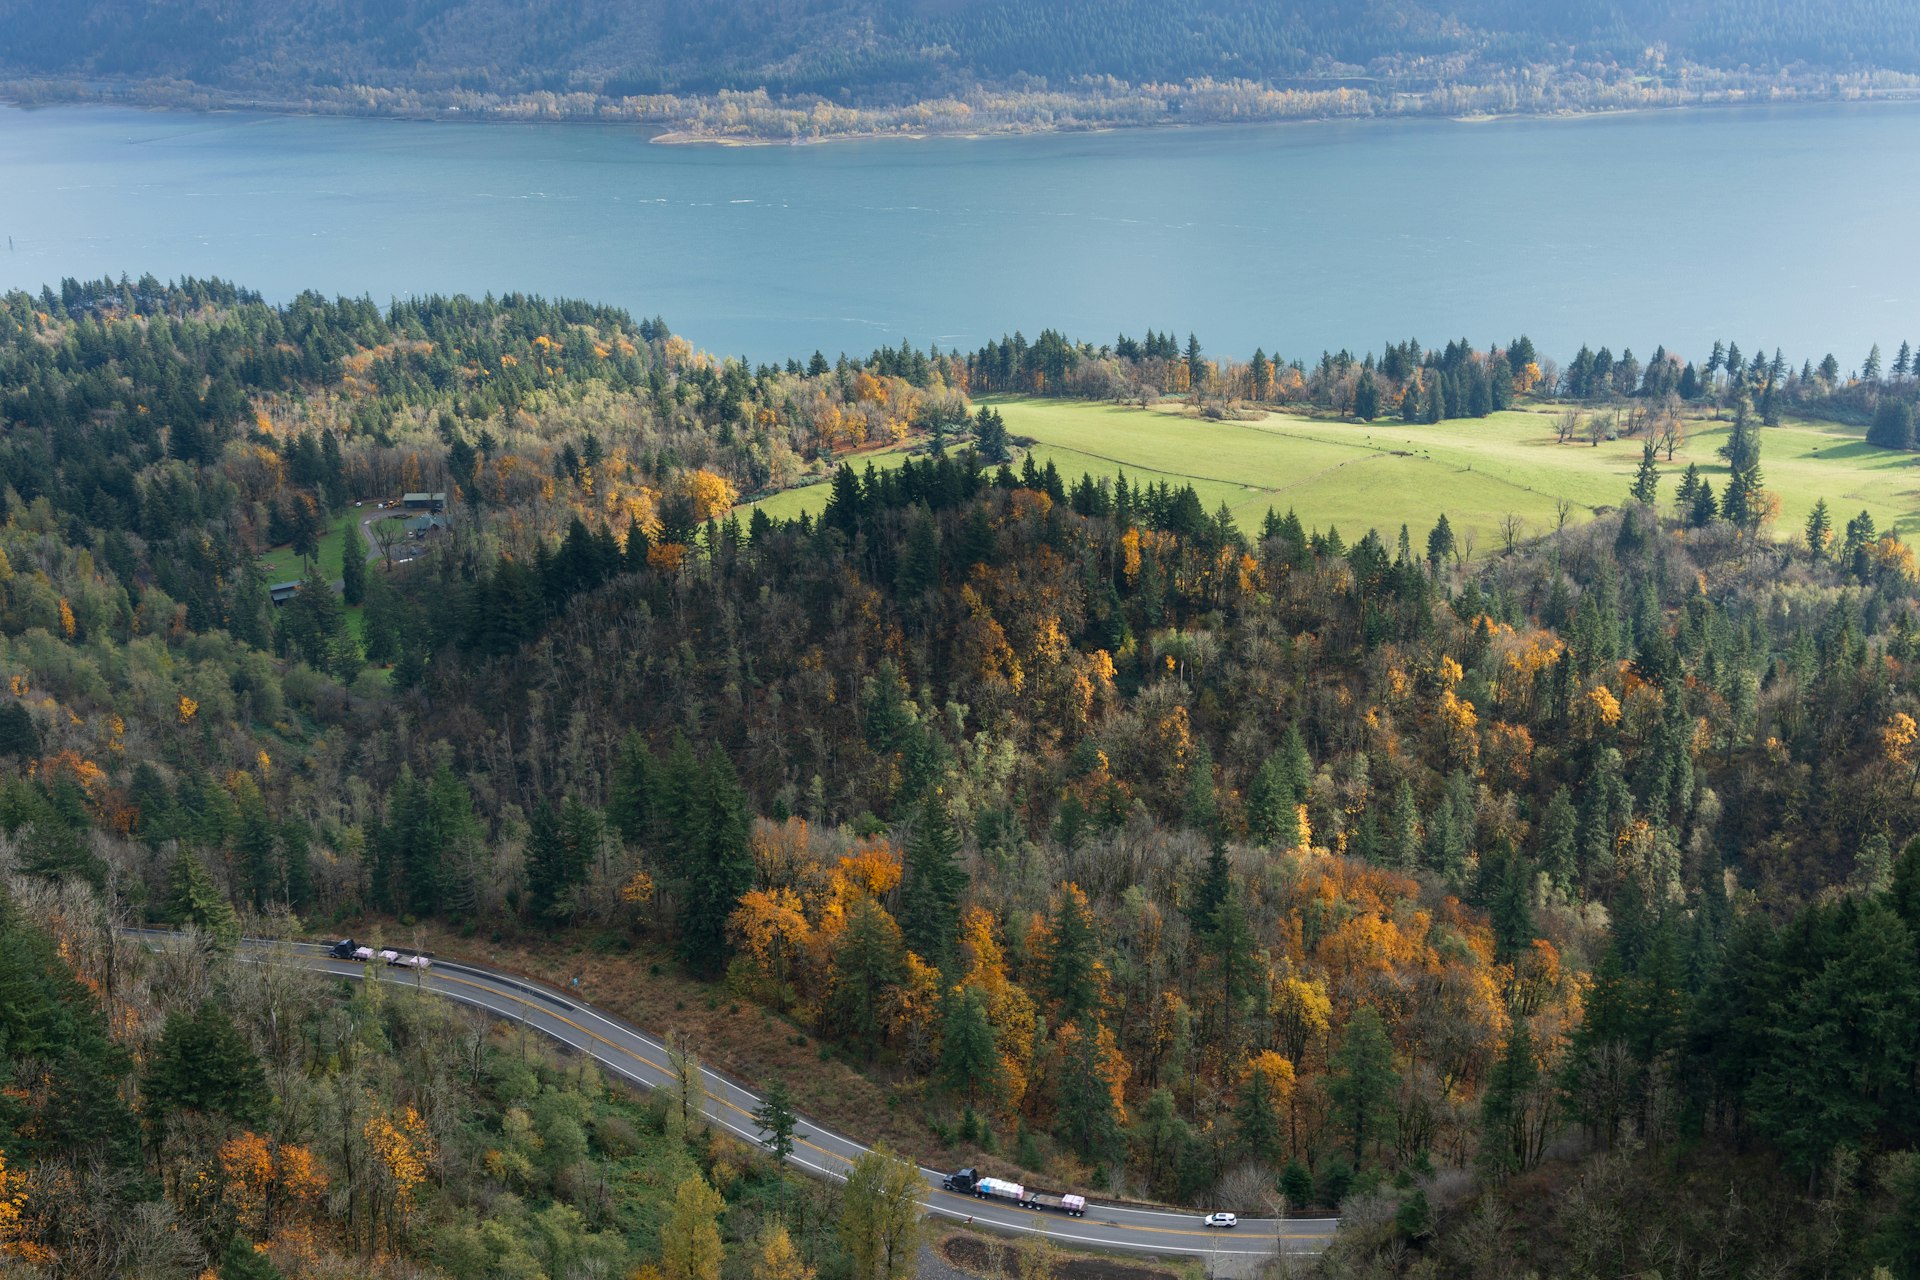 A view of Hwy 14 in at the Columbia River Gorge, Washington, USA